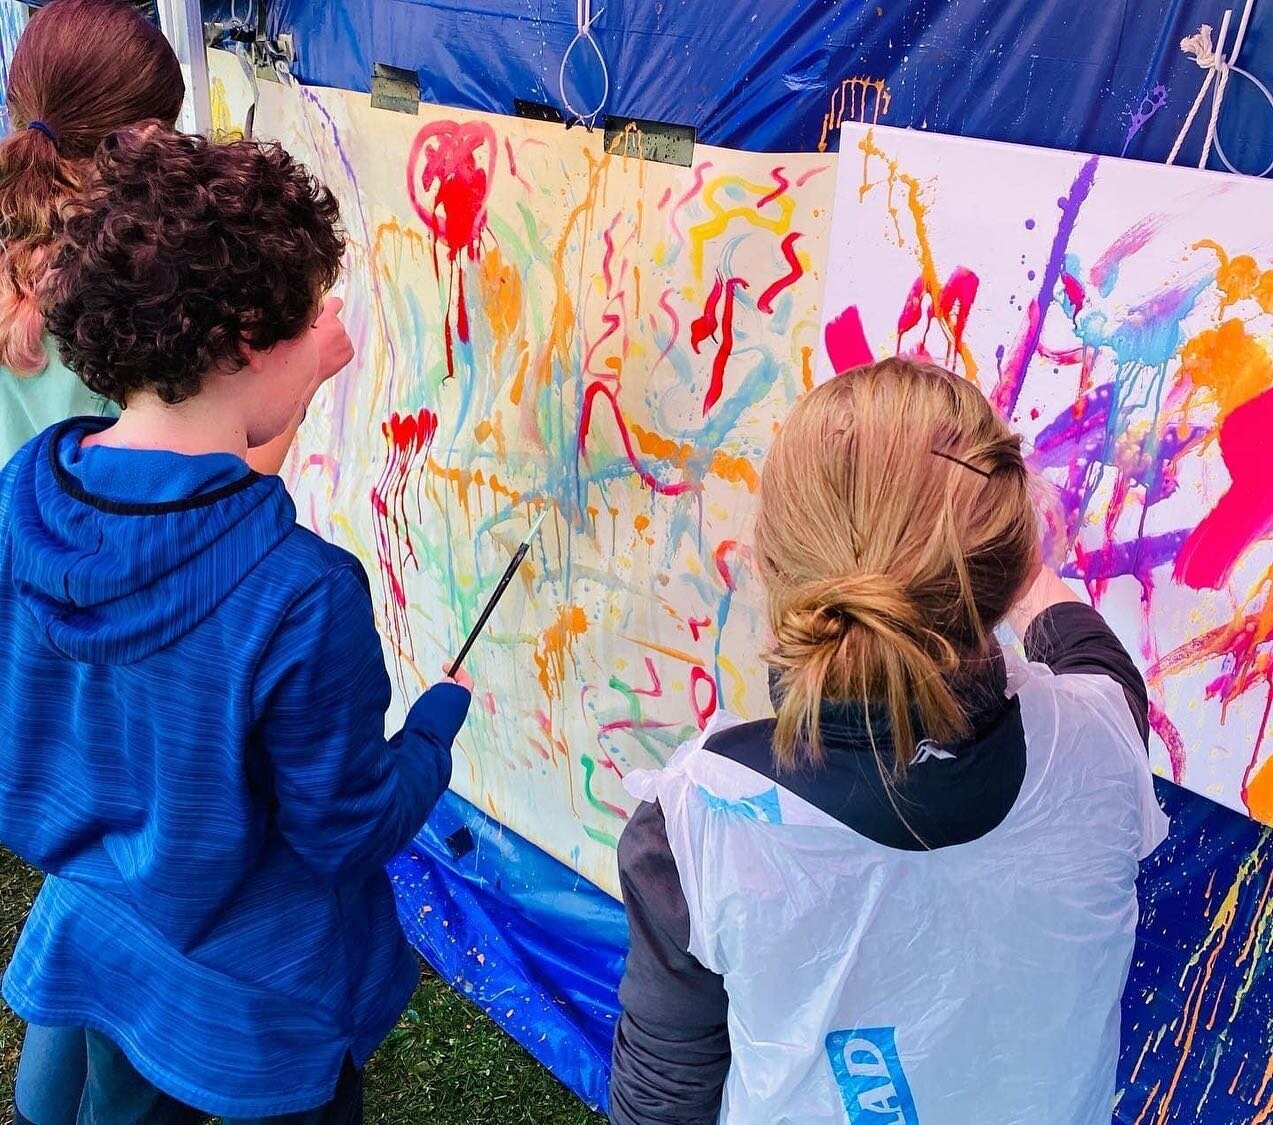 Paint What You Hear in Warragul this week! Lots of fun with art &amp; music. Big thank you to our fab musos &amp; the amazing team @westgippslandartscentre for their support &amp; enthusiasm! #paintwhatyouhear